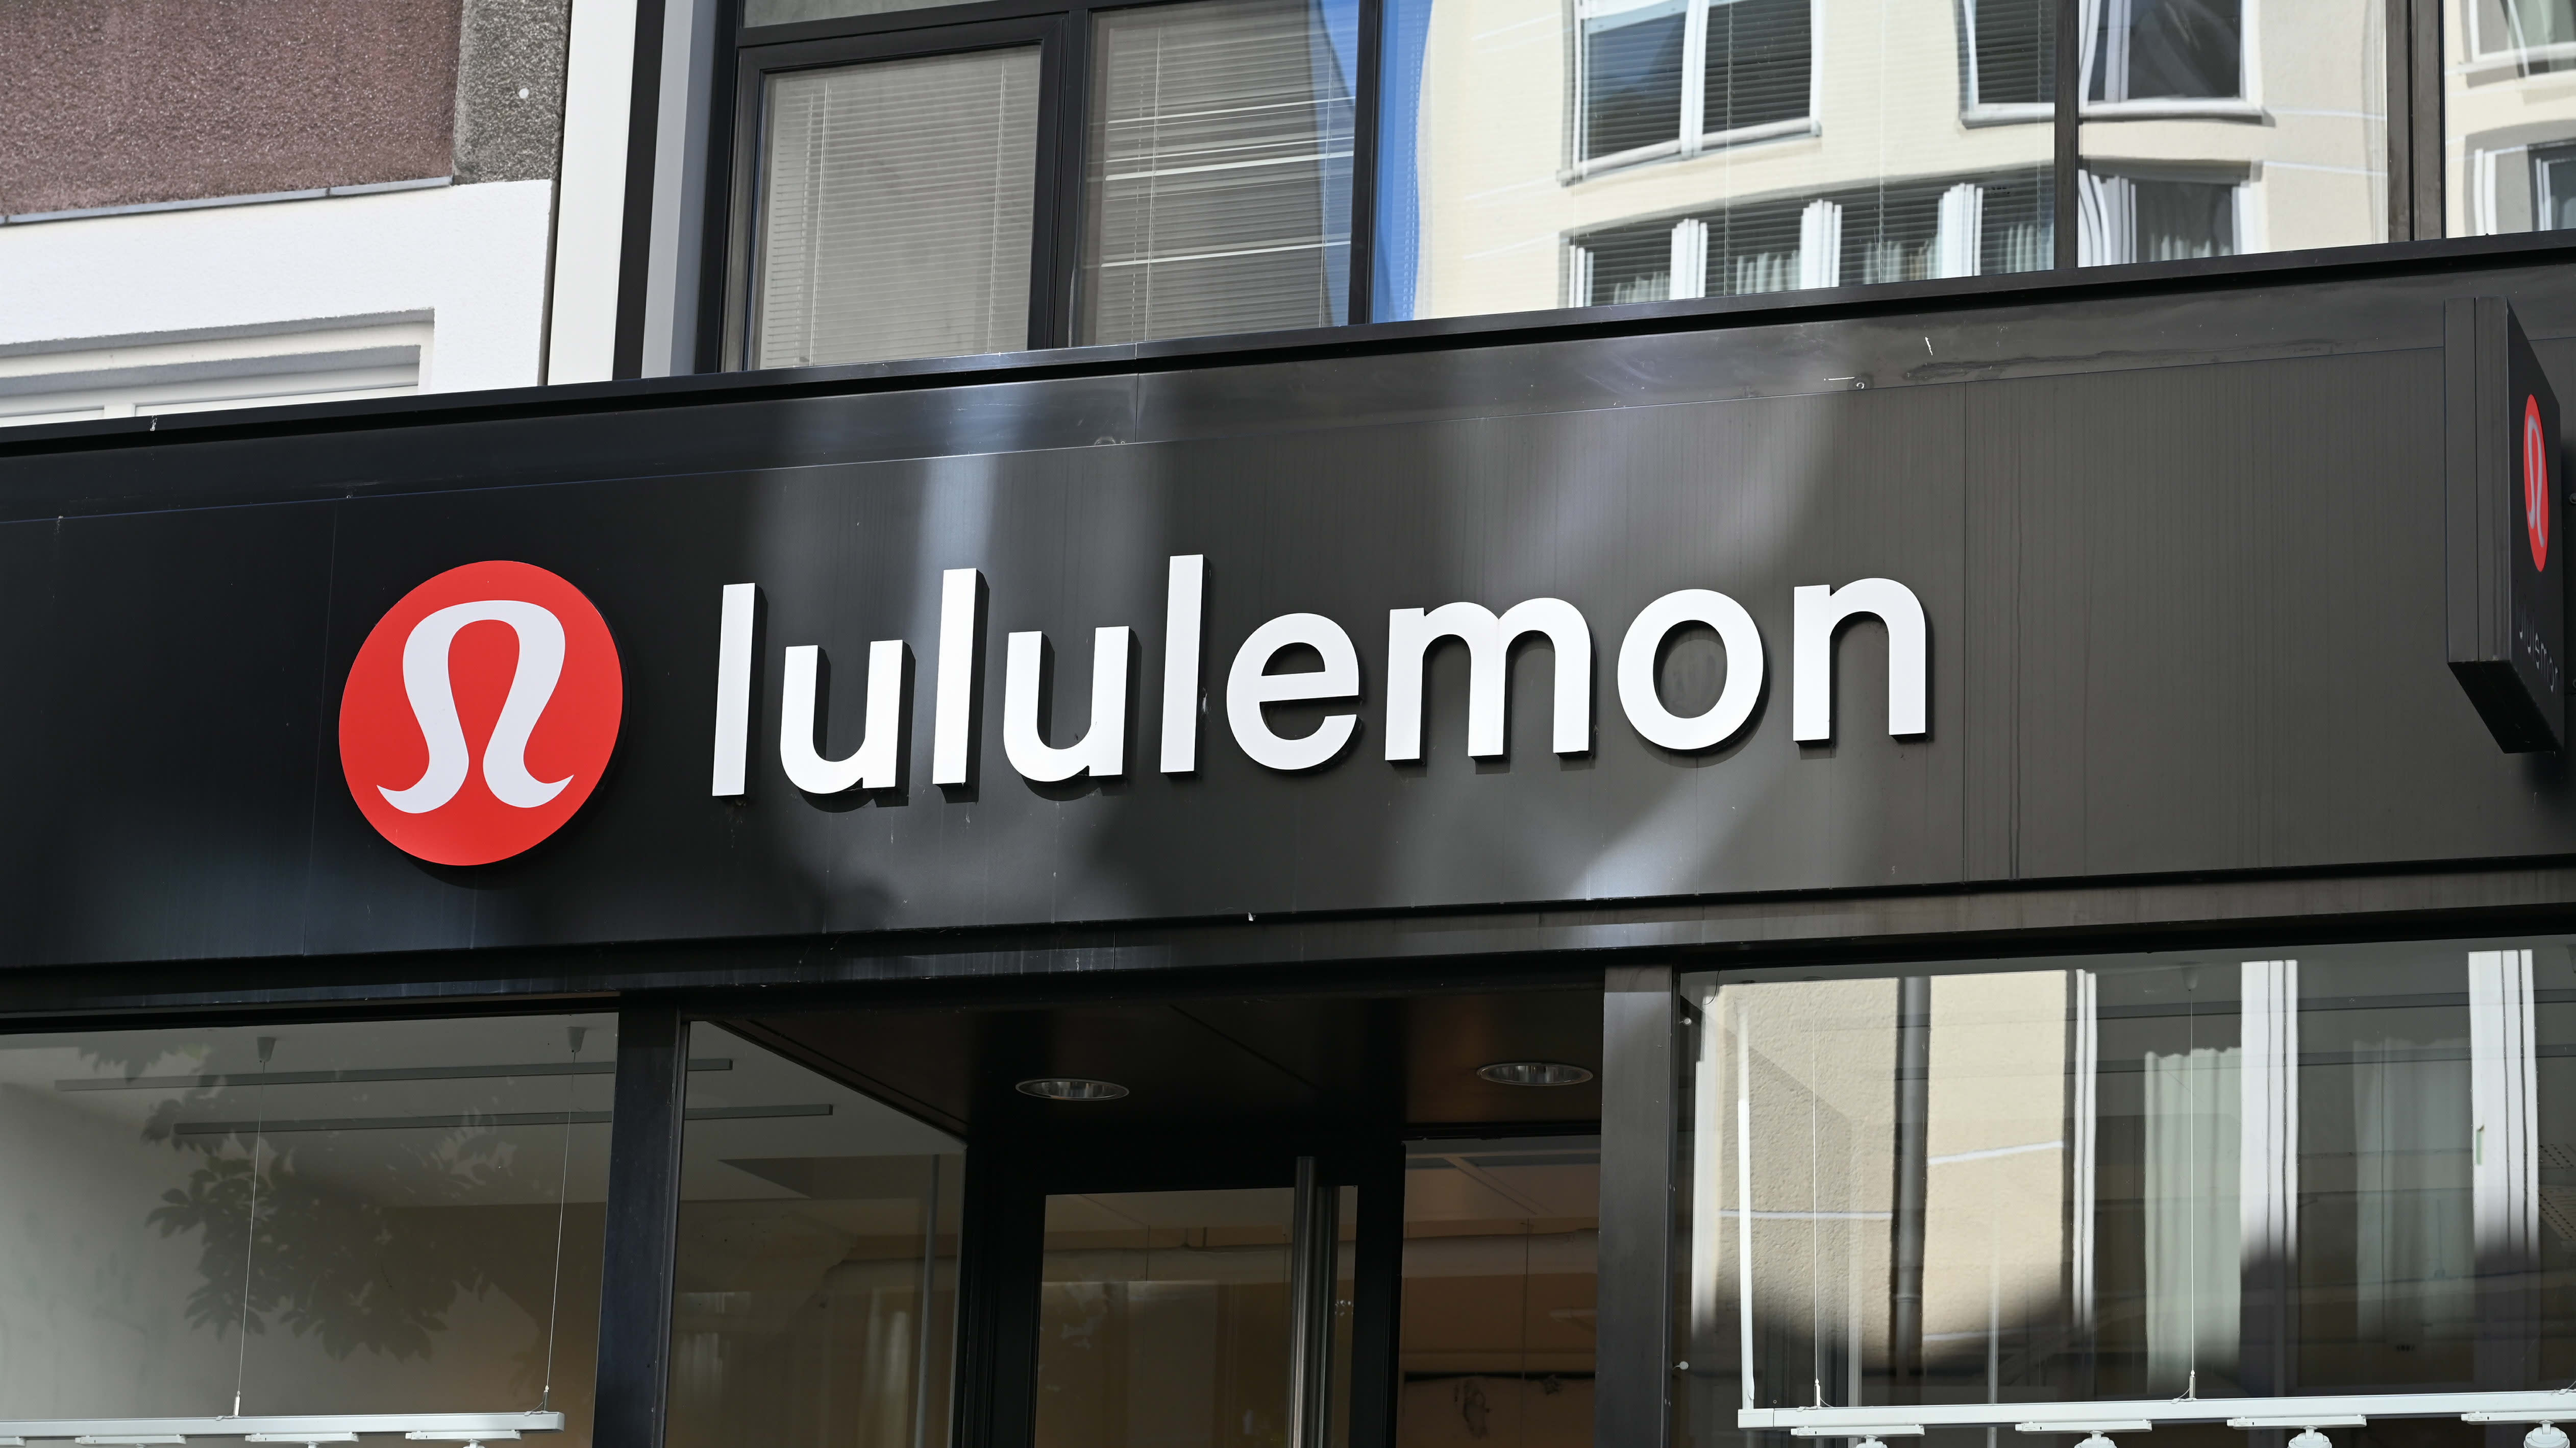 Why is Lululemon Stock Down Today? Unraveling the Mystery - Playbite